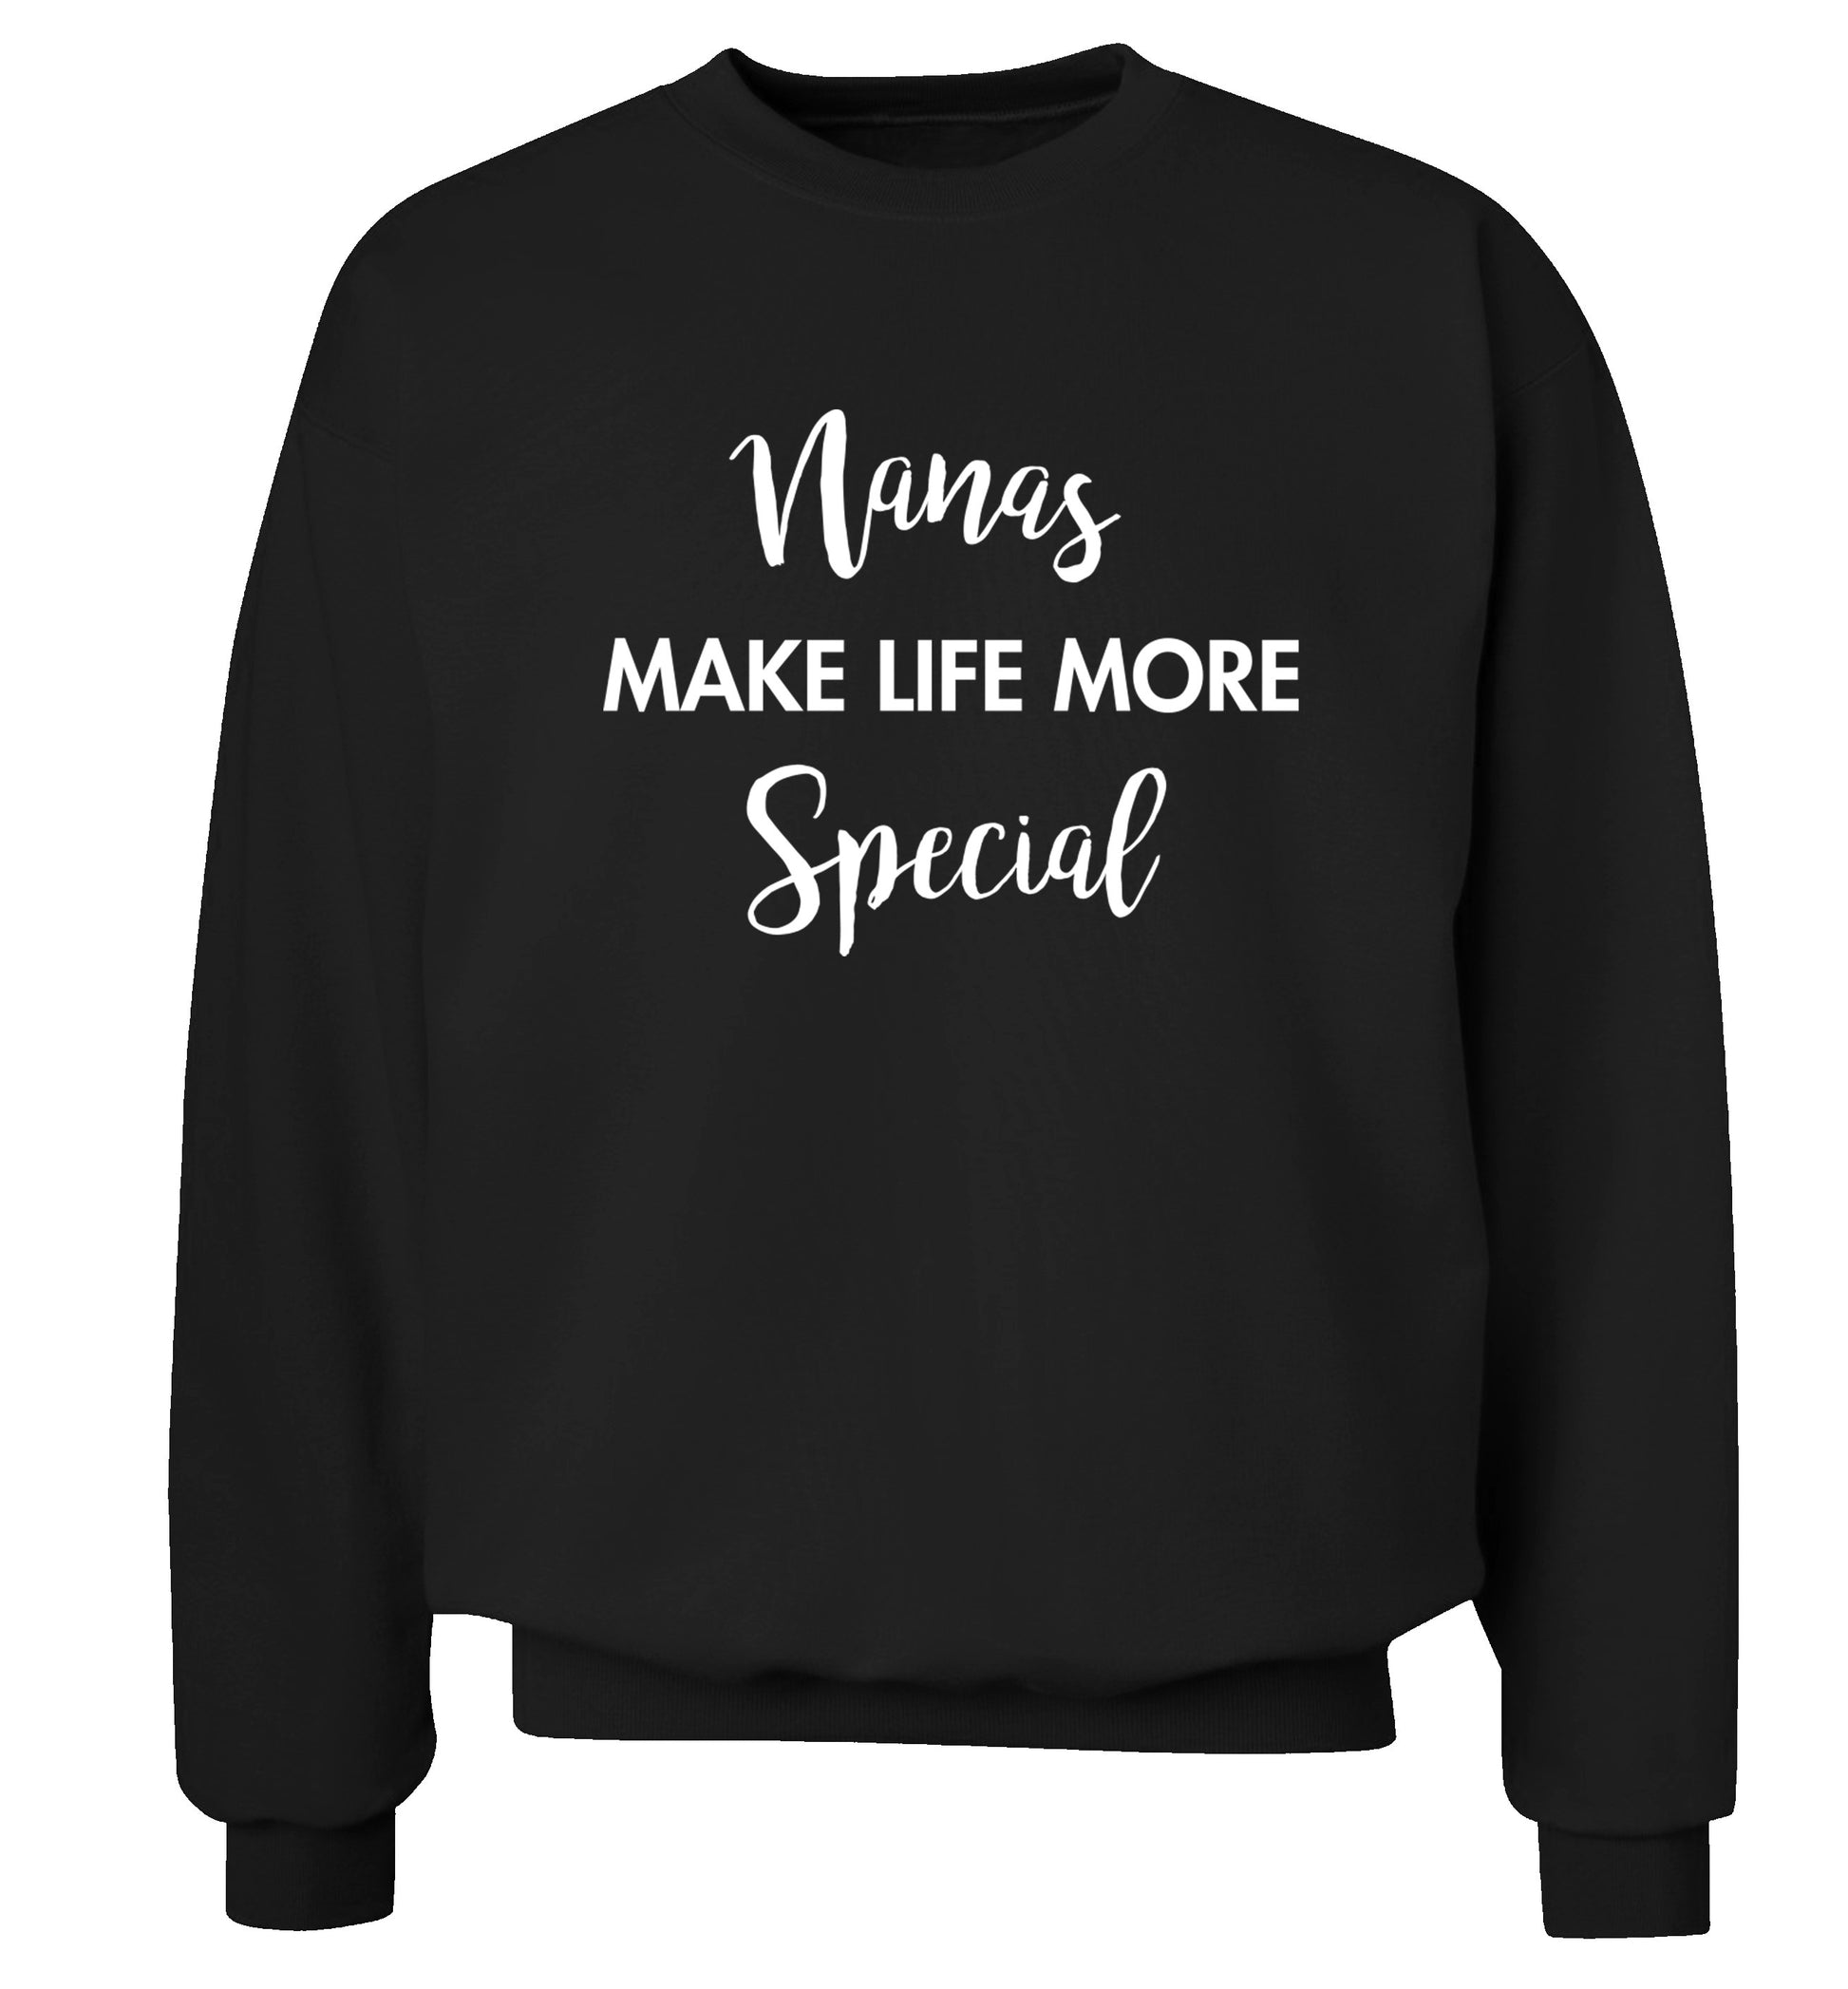 Nanas make life more special Adult's unisex black Sweater 2XL